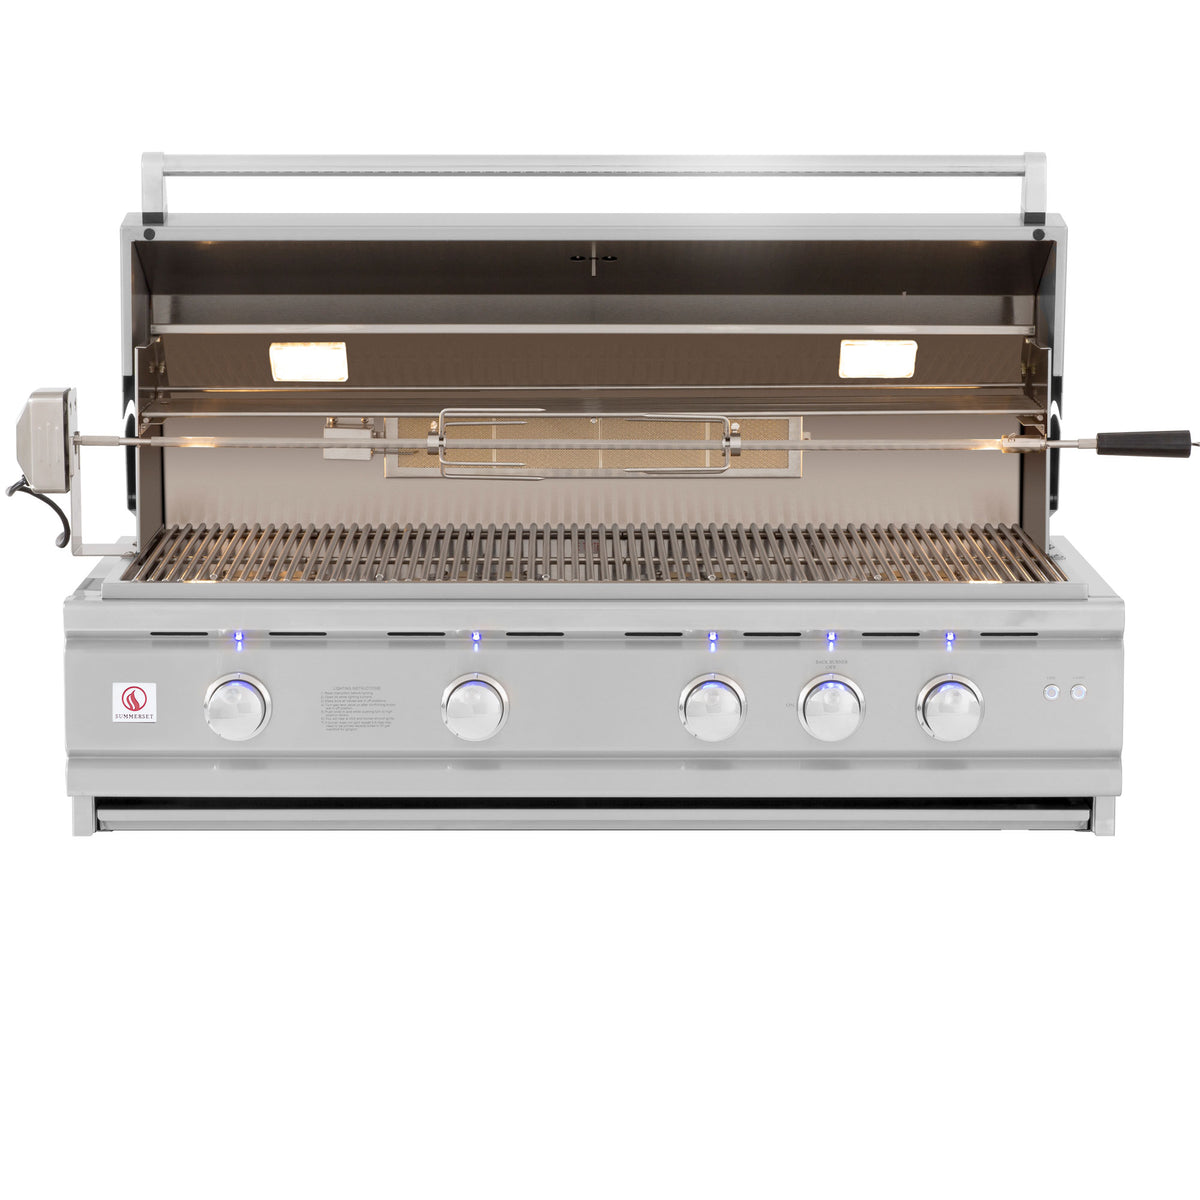 Summerset TRLD 44" Built-in Grill 42" 2-Drawer & Access Door Combo TRL Double Side Burner w/LED Illumination 5x14" Island Vent Panel Deluxe 44" Protective Built-in Grill Cover